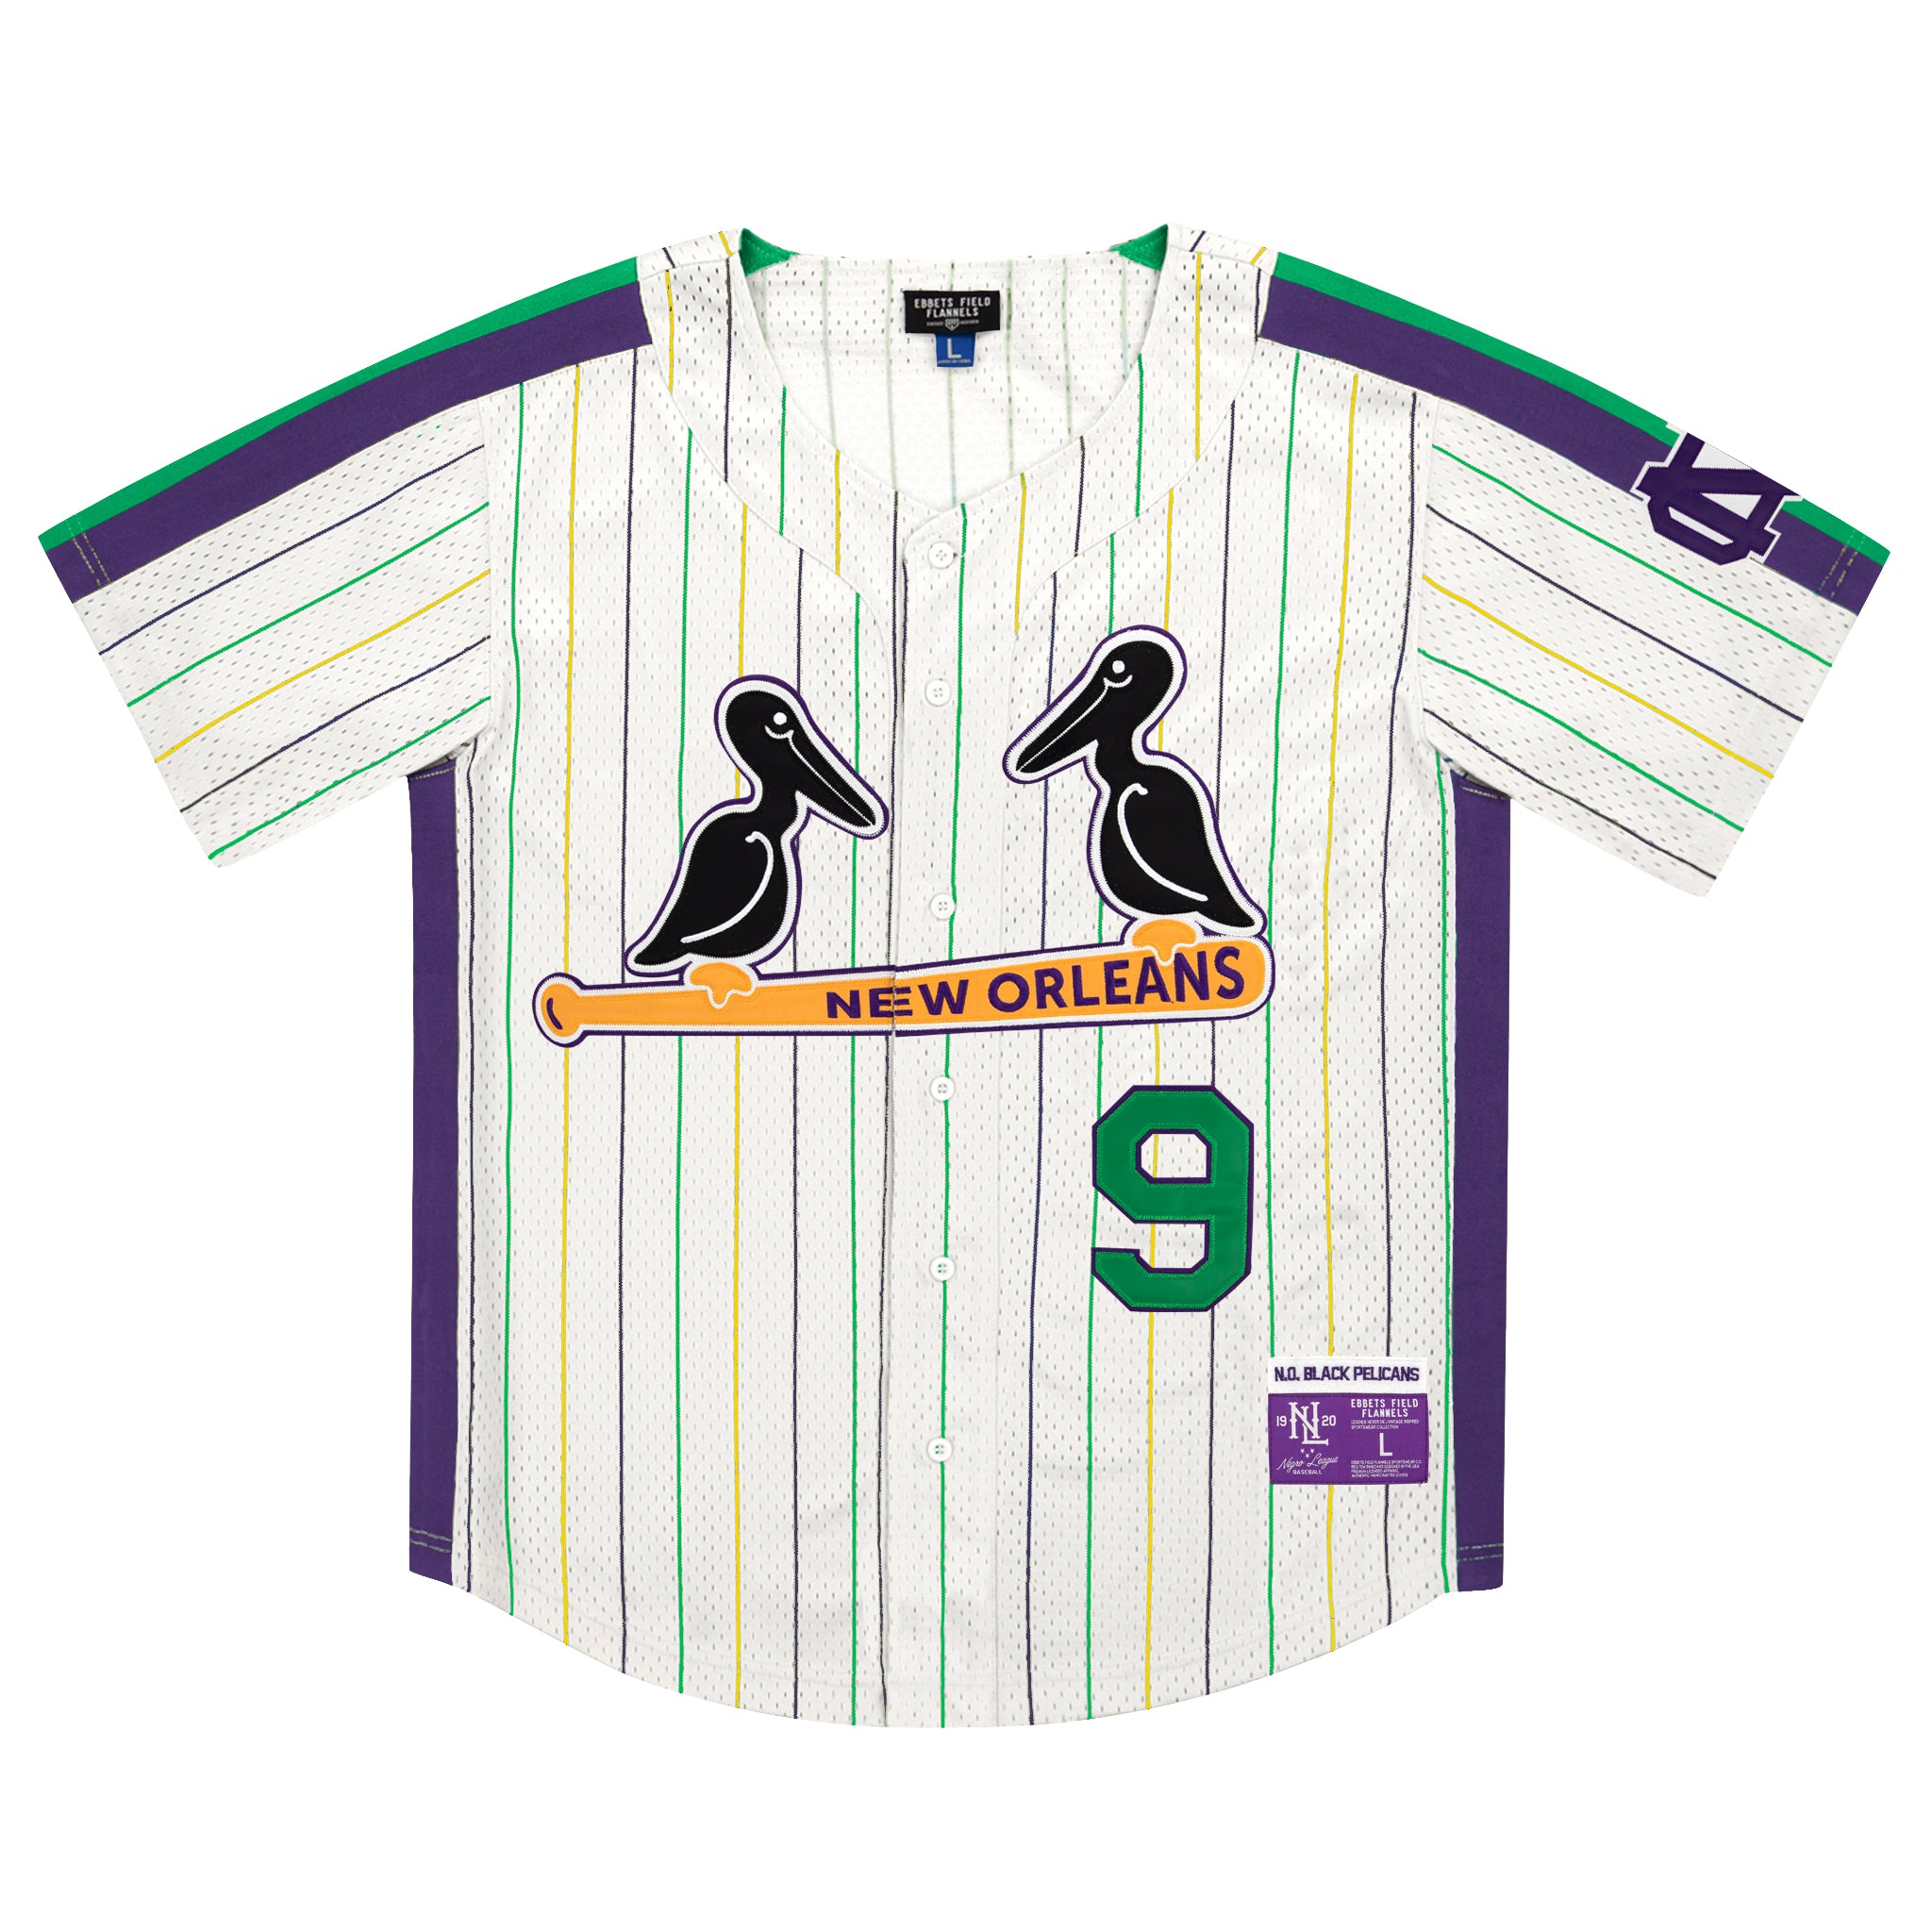 New Orleans Black Pelicans EFF NLB Pinstripe Button Down Jersey - Purple and Green